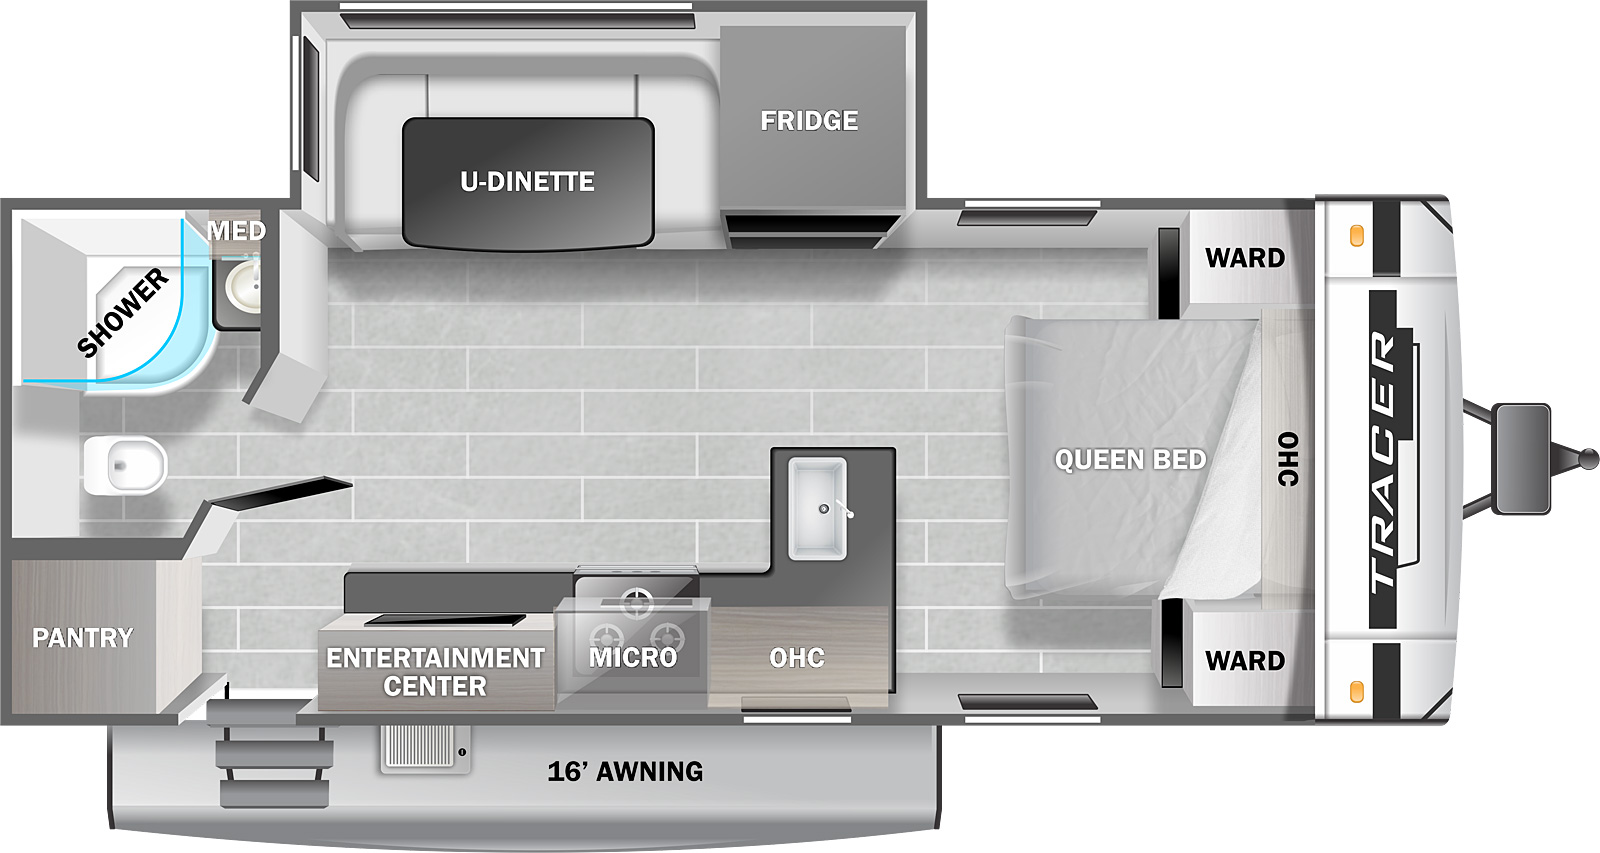 The Tracer 22RBS floorplan has one entry door, an outside grill, a 16 foot power awning, and one slideout. The entry door is toward the rear of the RV. To the left of the entry door is a pantry. The rear off door corner has a door leading to the bathroom. The bathroom has a toilet, shower, and sink with a medicine cabinet above. The living area slideout is on the off door side to the right of the bathroom. It has a U-dinette and a refrigerator. To the right of the slideout, in the front of the RV is the bedroom area. The bedroom has a queen bed with a wardrobe and night stand on the right and left and overhead storage above. On the door side of the RV, opposite the slideout area is an L-shaped counter top with a sink and stove. A microwave is above the stove. Overhead storage is above the countertop to the right and left of the microwave. To the left of the kitchen counter top is an entertainment center. The entertainment center is directly to the right of the entry door.